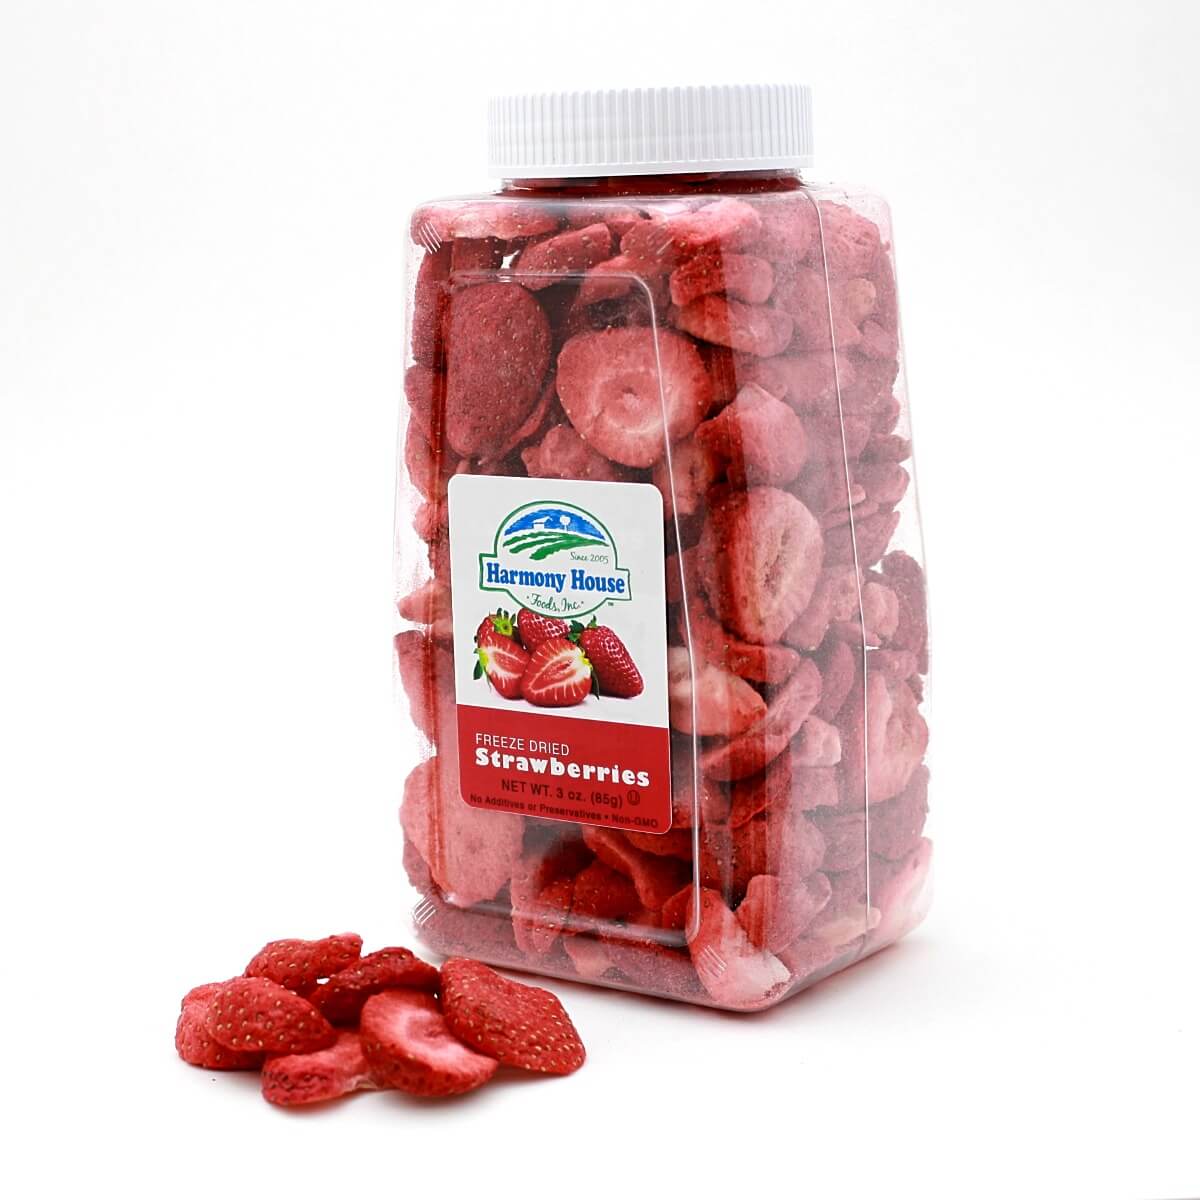 A jar of sliced Harmony House Freeze Dried Strawberries (3 oz) sitting on a white surface.